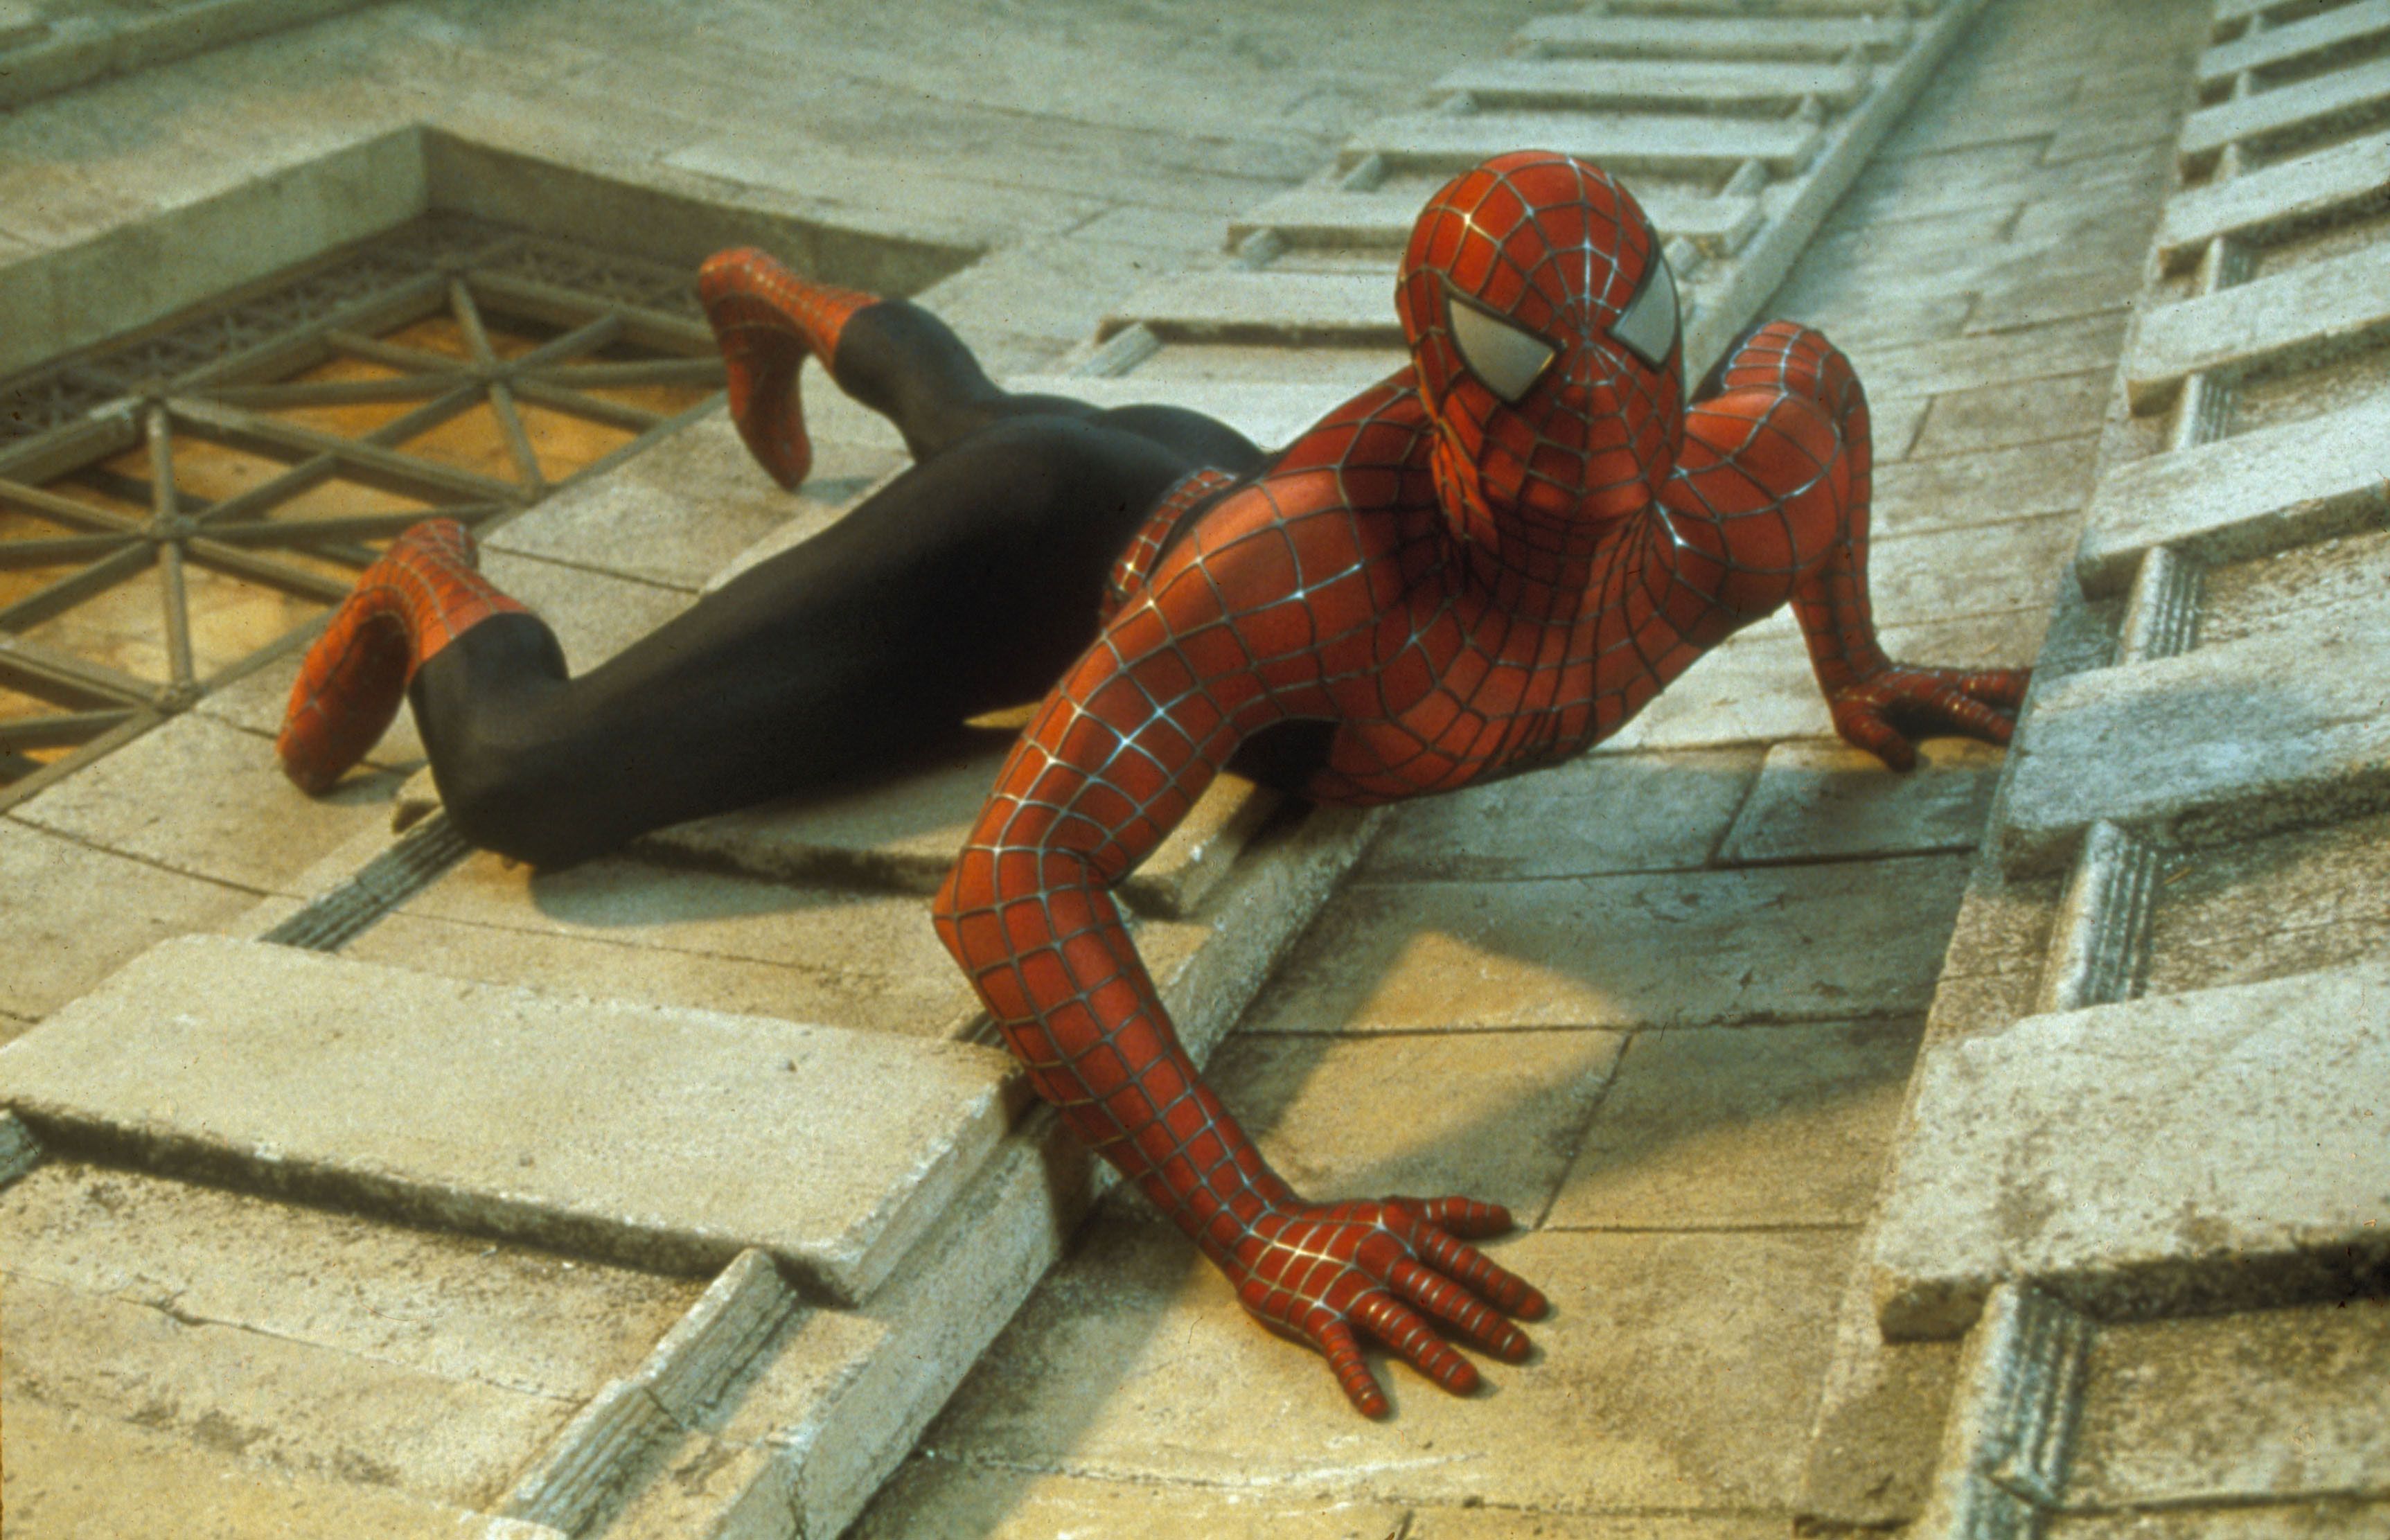 Tobey Maguire Reveals The Worst Part About Playing Spider-Man